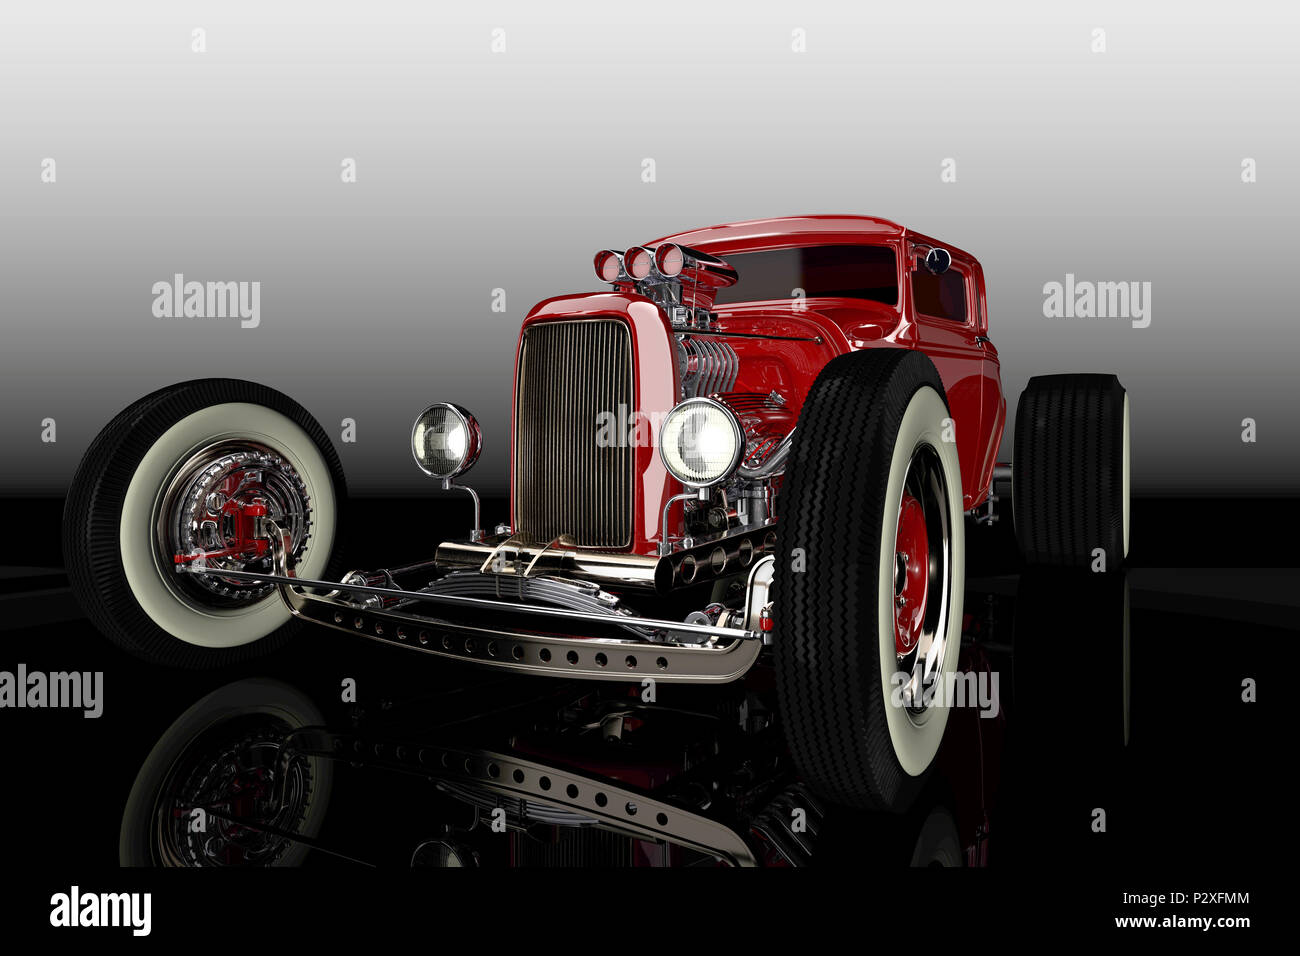 Hot Rod, Cars, Classic Car background | Download Free images